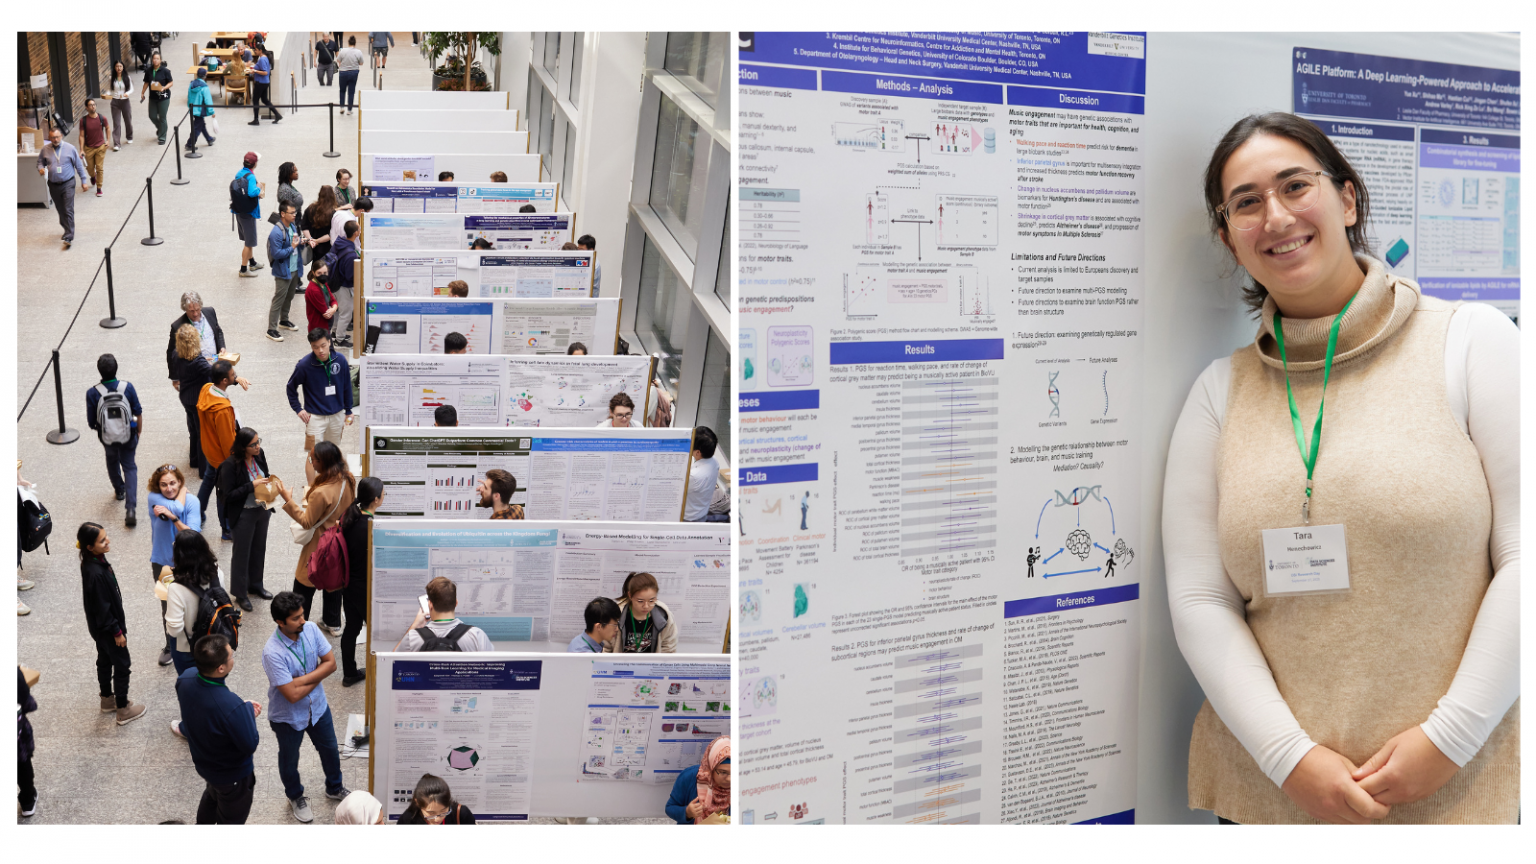 Image on left: A groups of students attend a fair presenting their research Image on right: a student presents their research and stands in front of a poster.